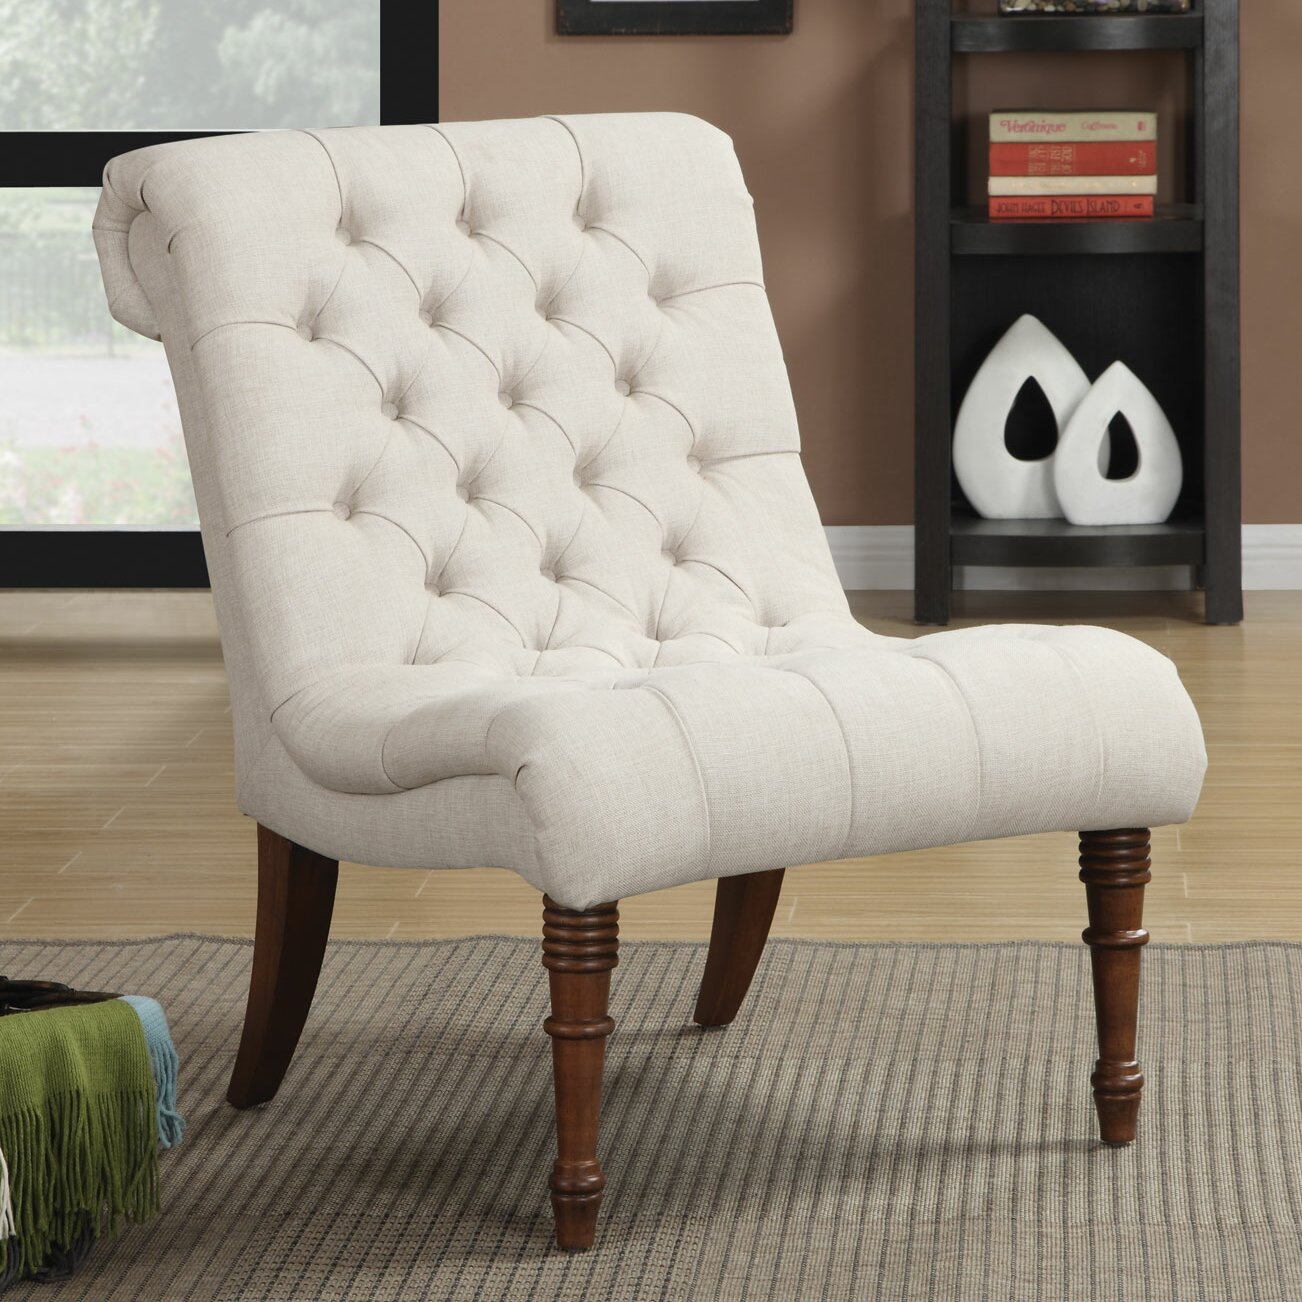 How To Choose A Slipper Chair For Your Home